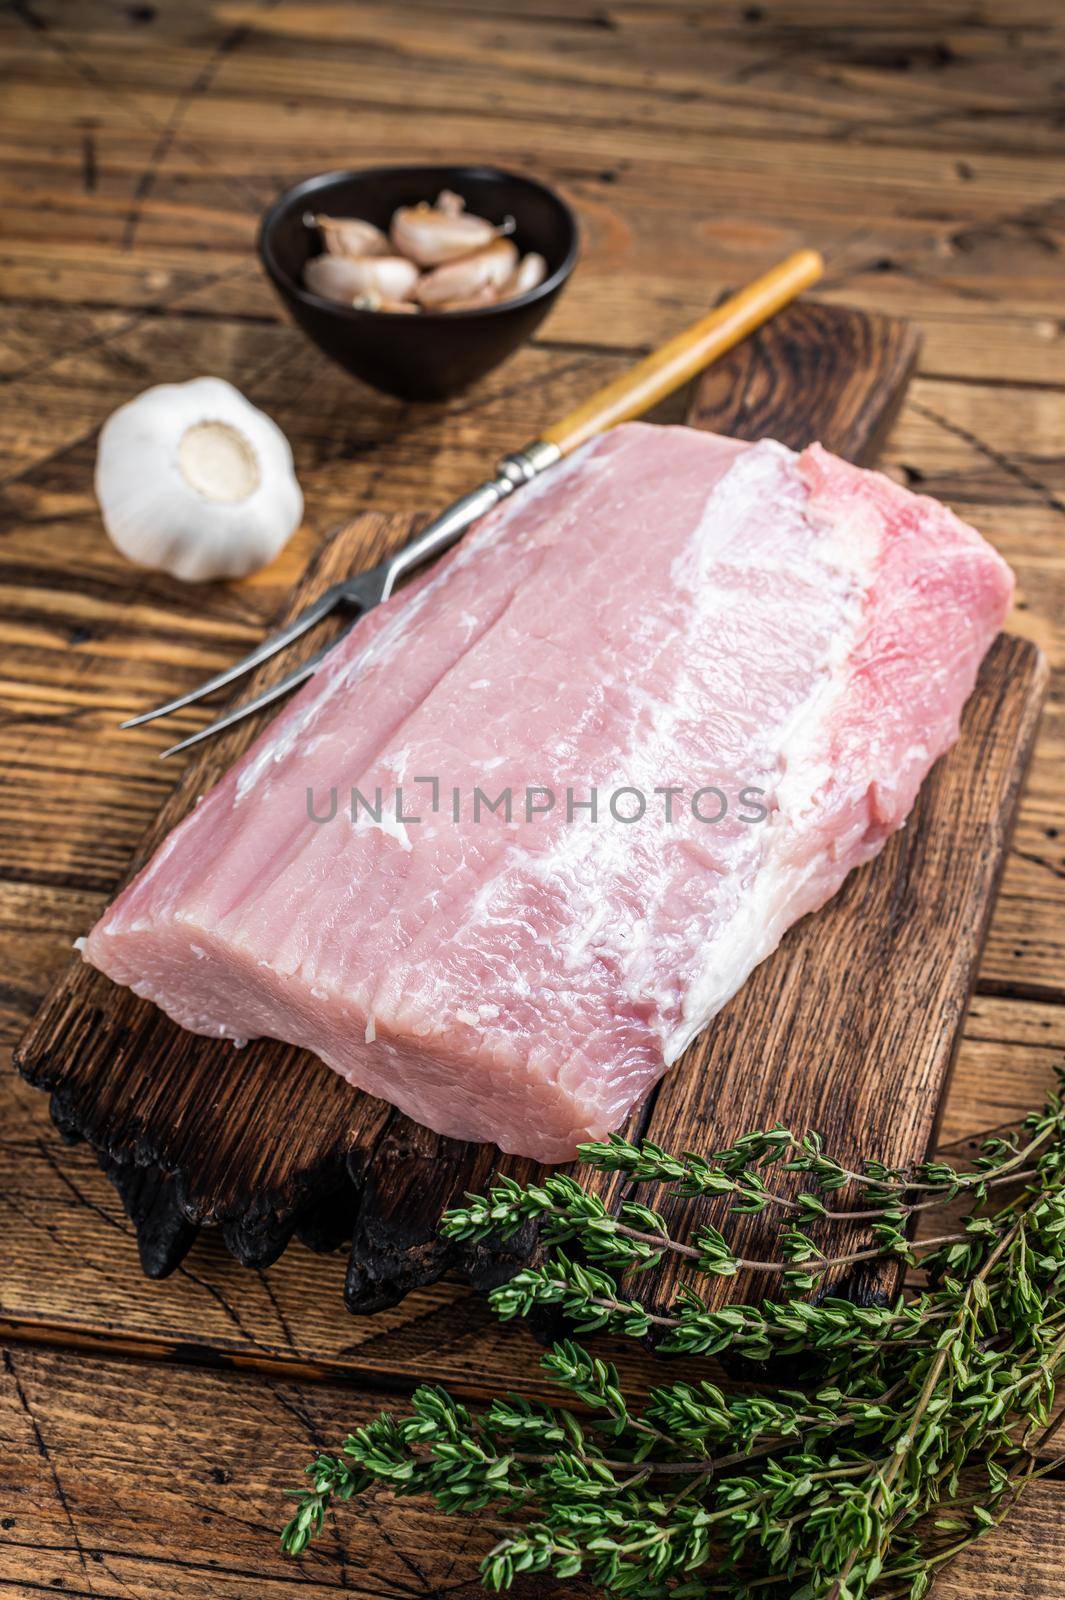 Raw pork loin with spices on wooden board. wooden background. Top view.